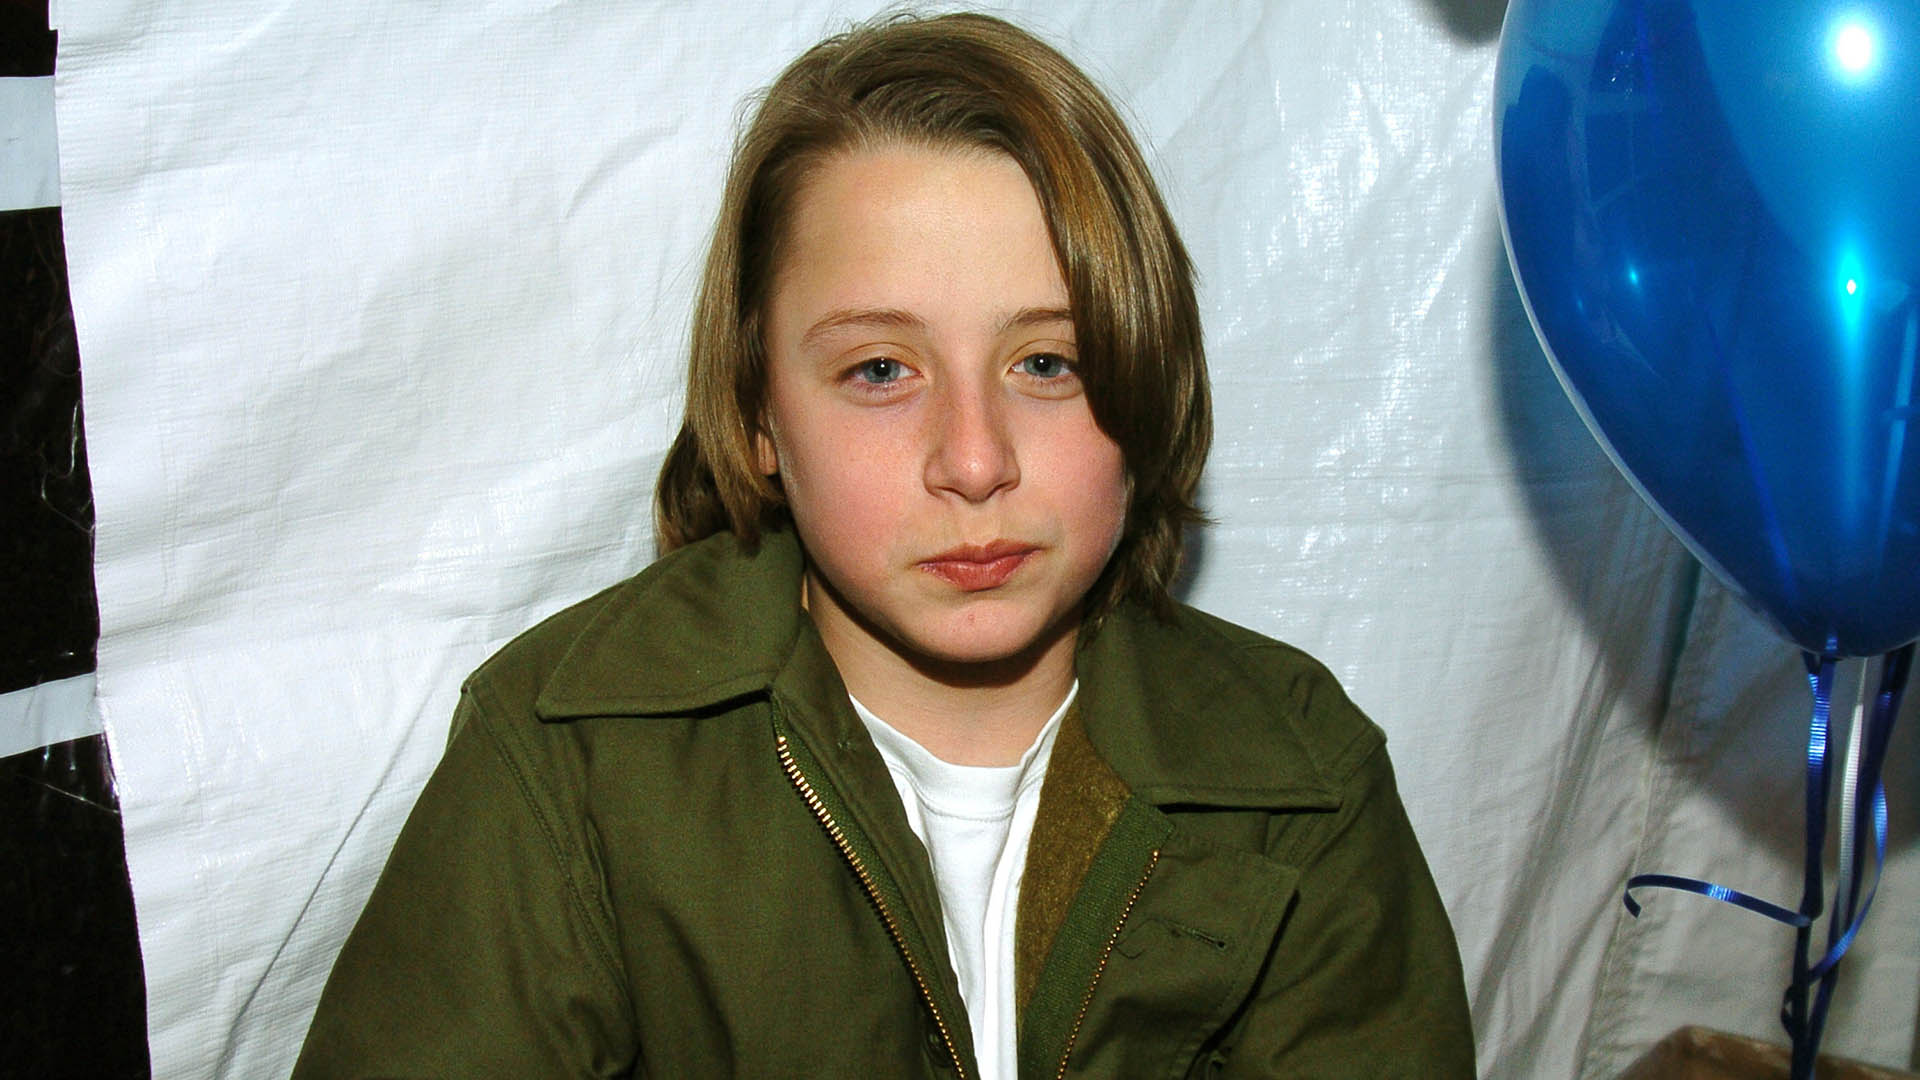 <p>Rory Culkin is the other actor in the family. He is one of the youngest siblings, born in 1989. Along with Macaulay, he was part of the movie 'Richie Rich' (1994). Before that, he did a photograph cameo in the movie 'The Good Son' (1993), which also starred his sister Quinn and his brother Macaulay.</p>